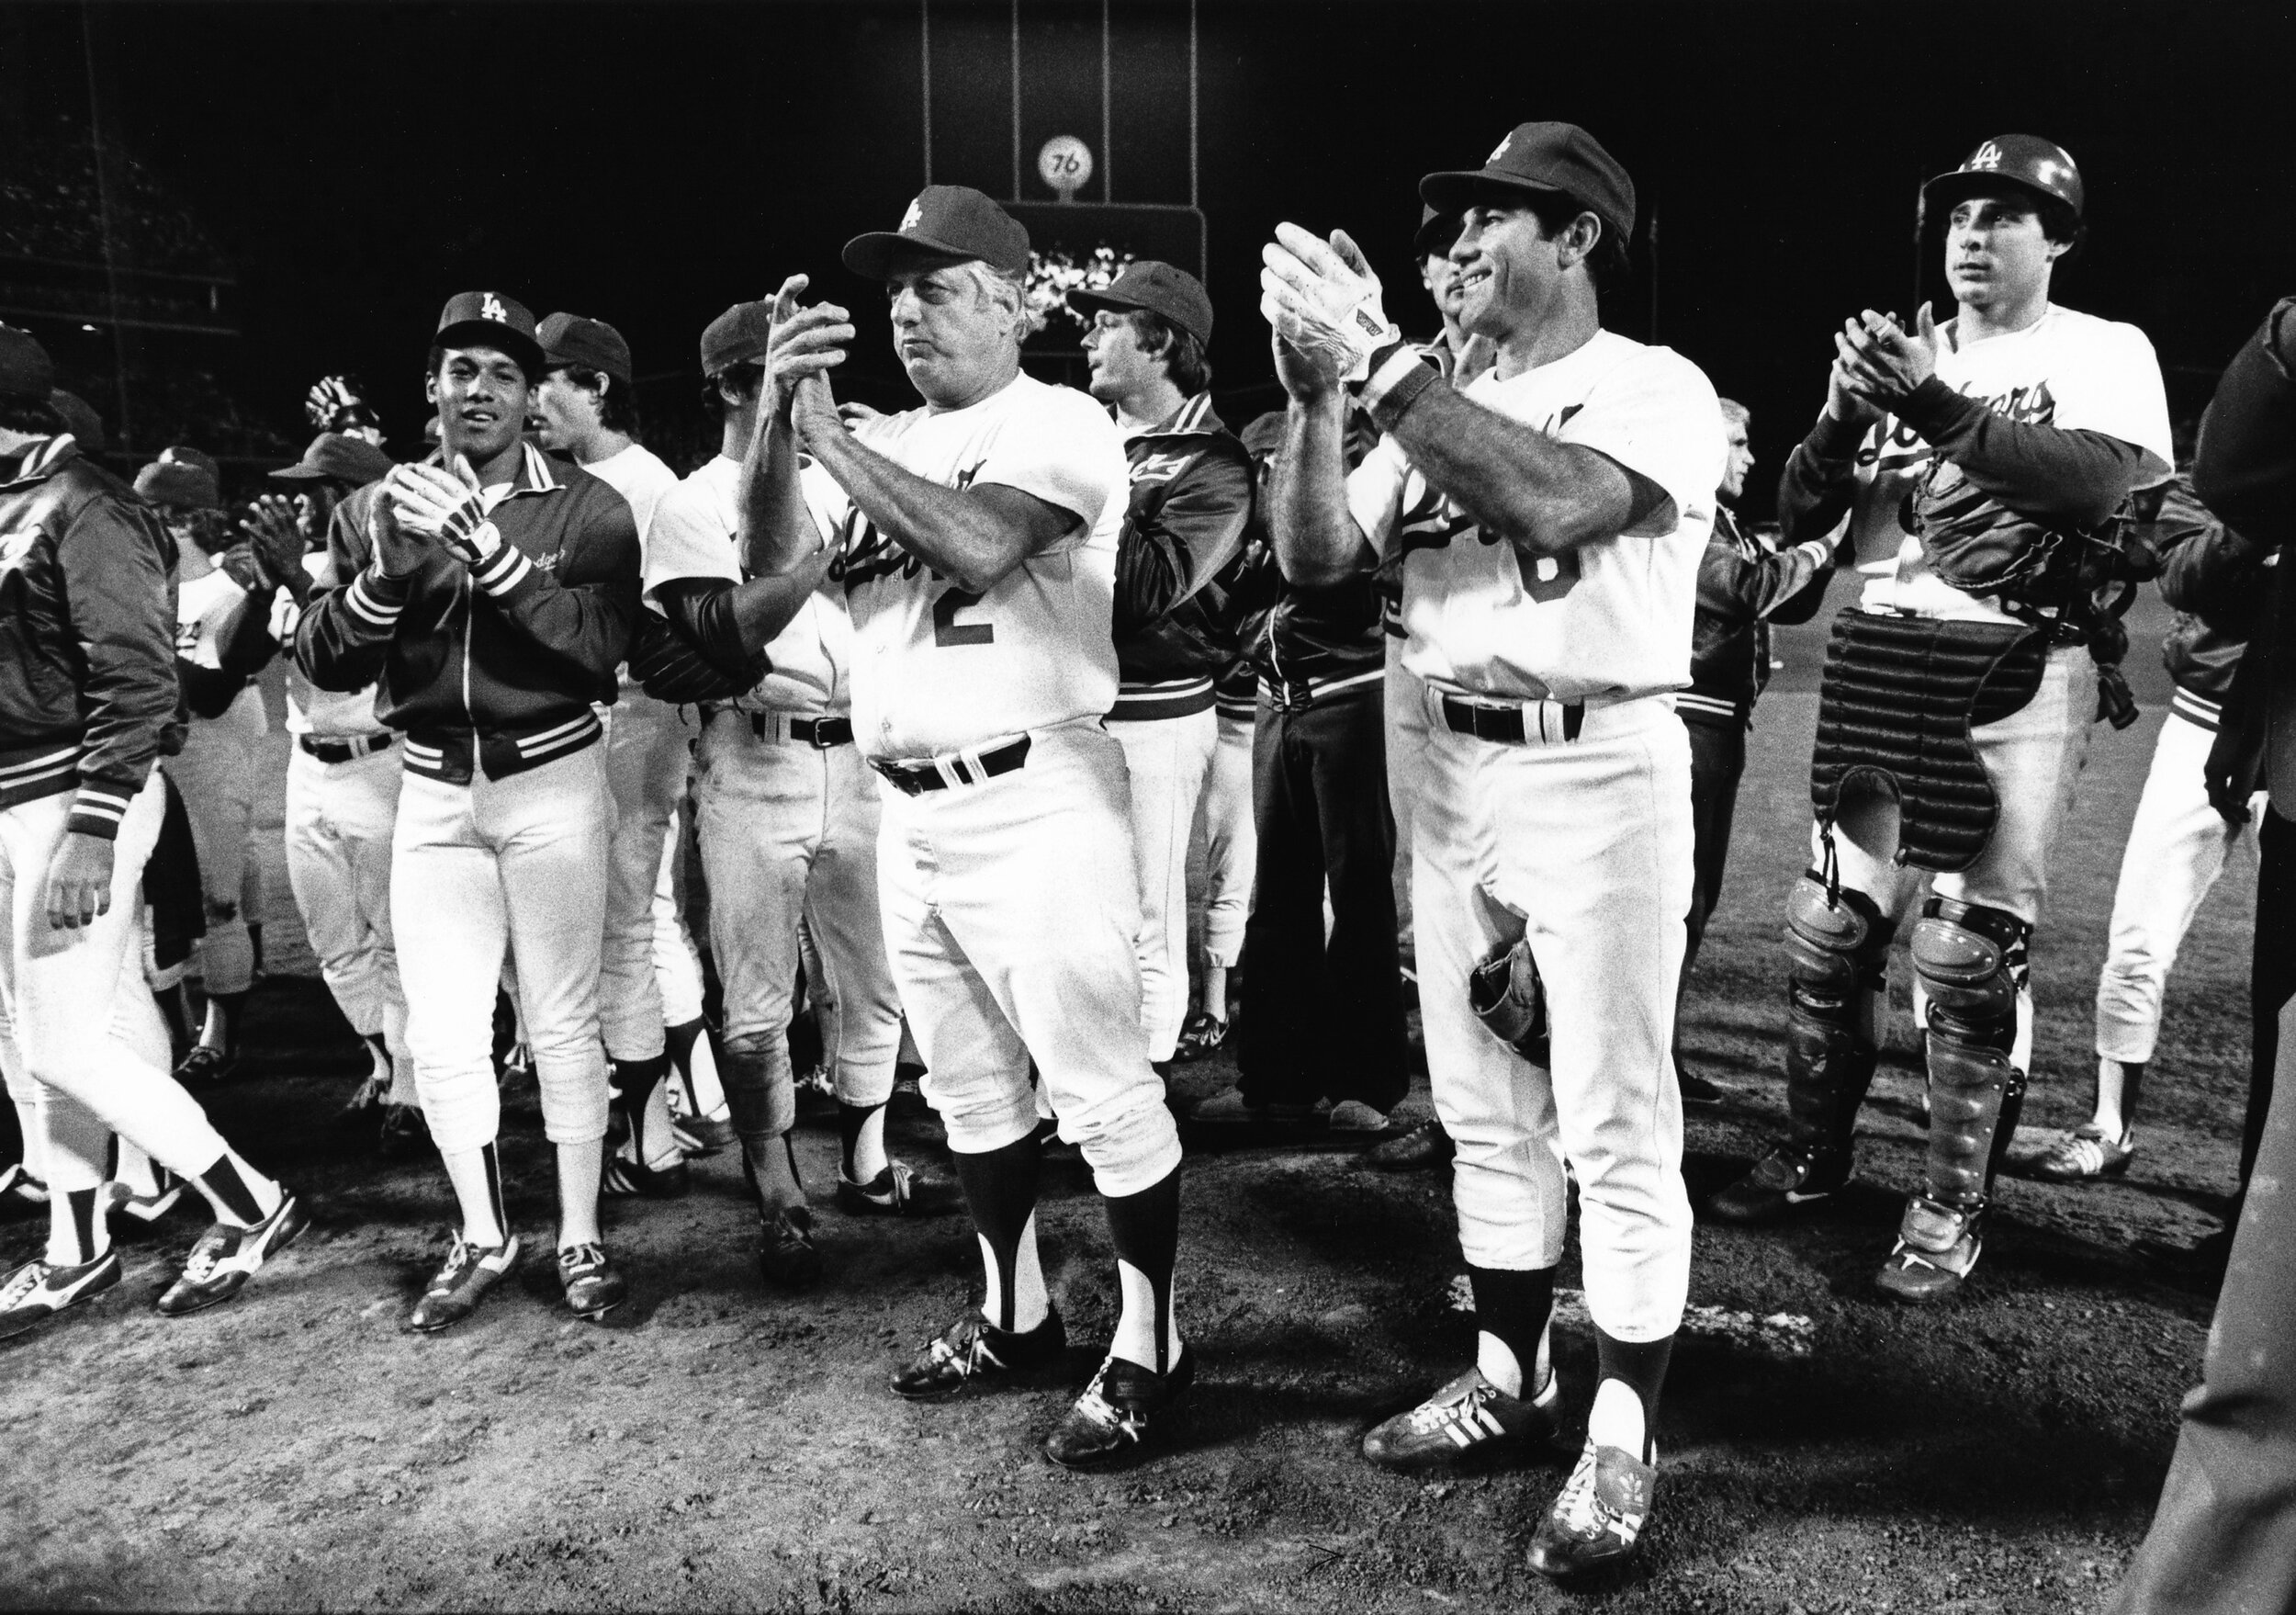  LOS ANGELES, CA - 1983: Candy Maldonado #20, Manager Tommy Lasorda #2, Steve Garvey #6 and Mike Scoscia #14 of the Los Angeles Dodgers acknowledge the crowd after playing the last game of the season at Dodger Stadium, Los Angeles, California. (Photo